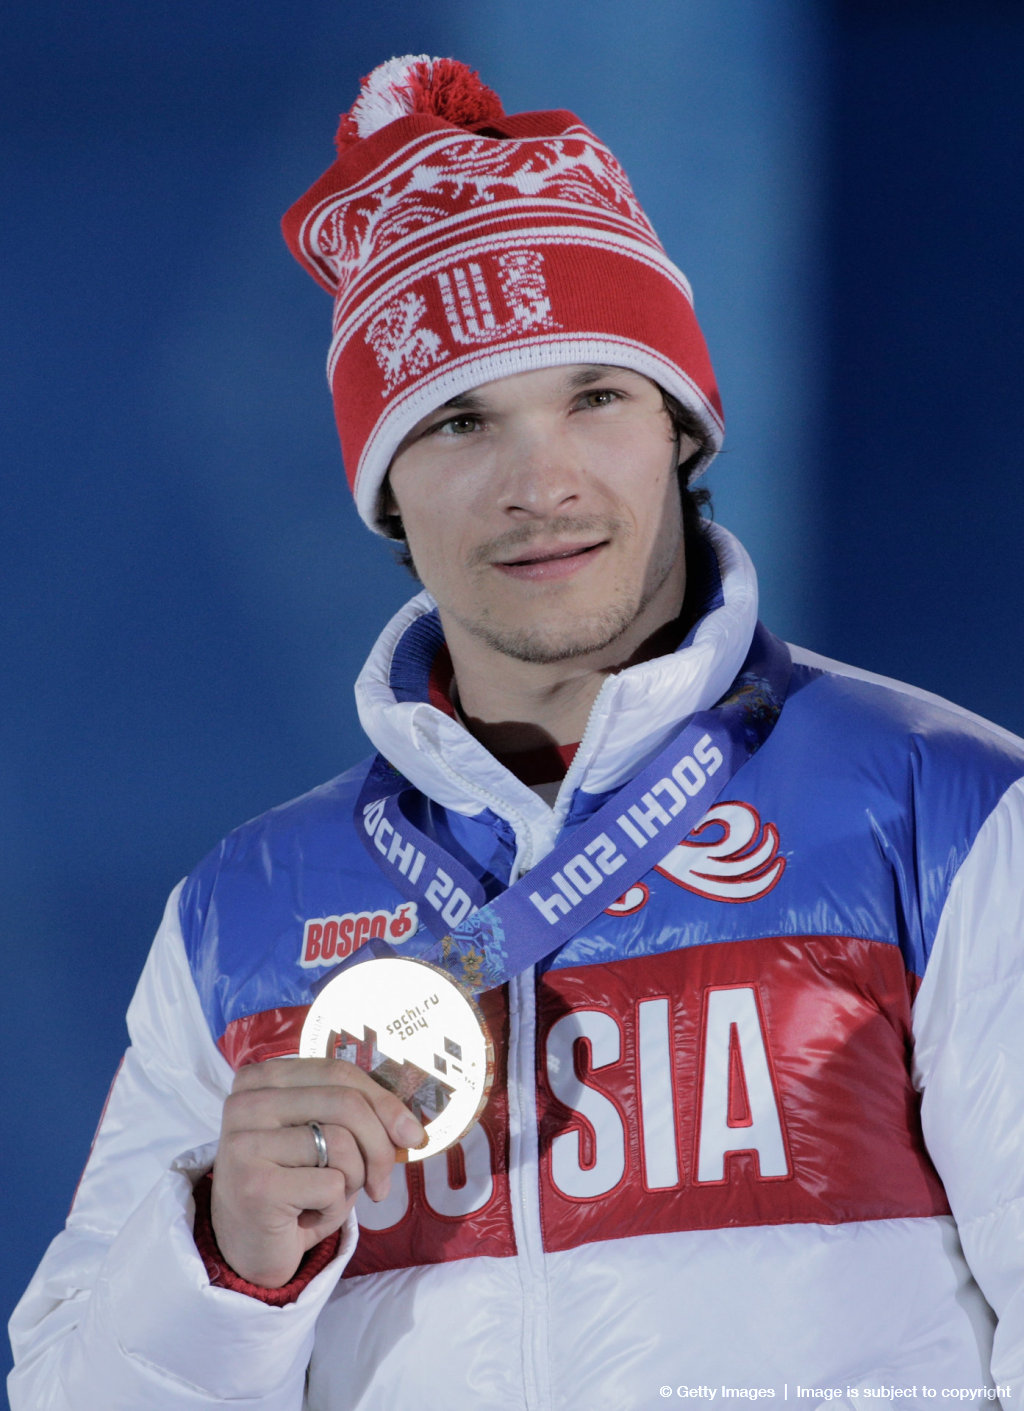 Medal Ceremony — Winter Olympics Day 12